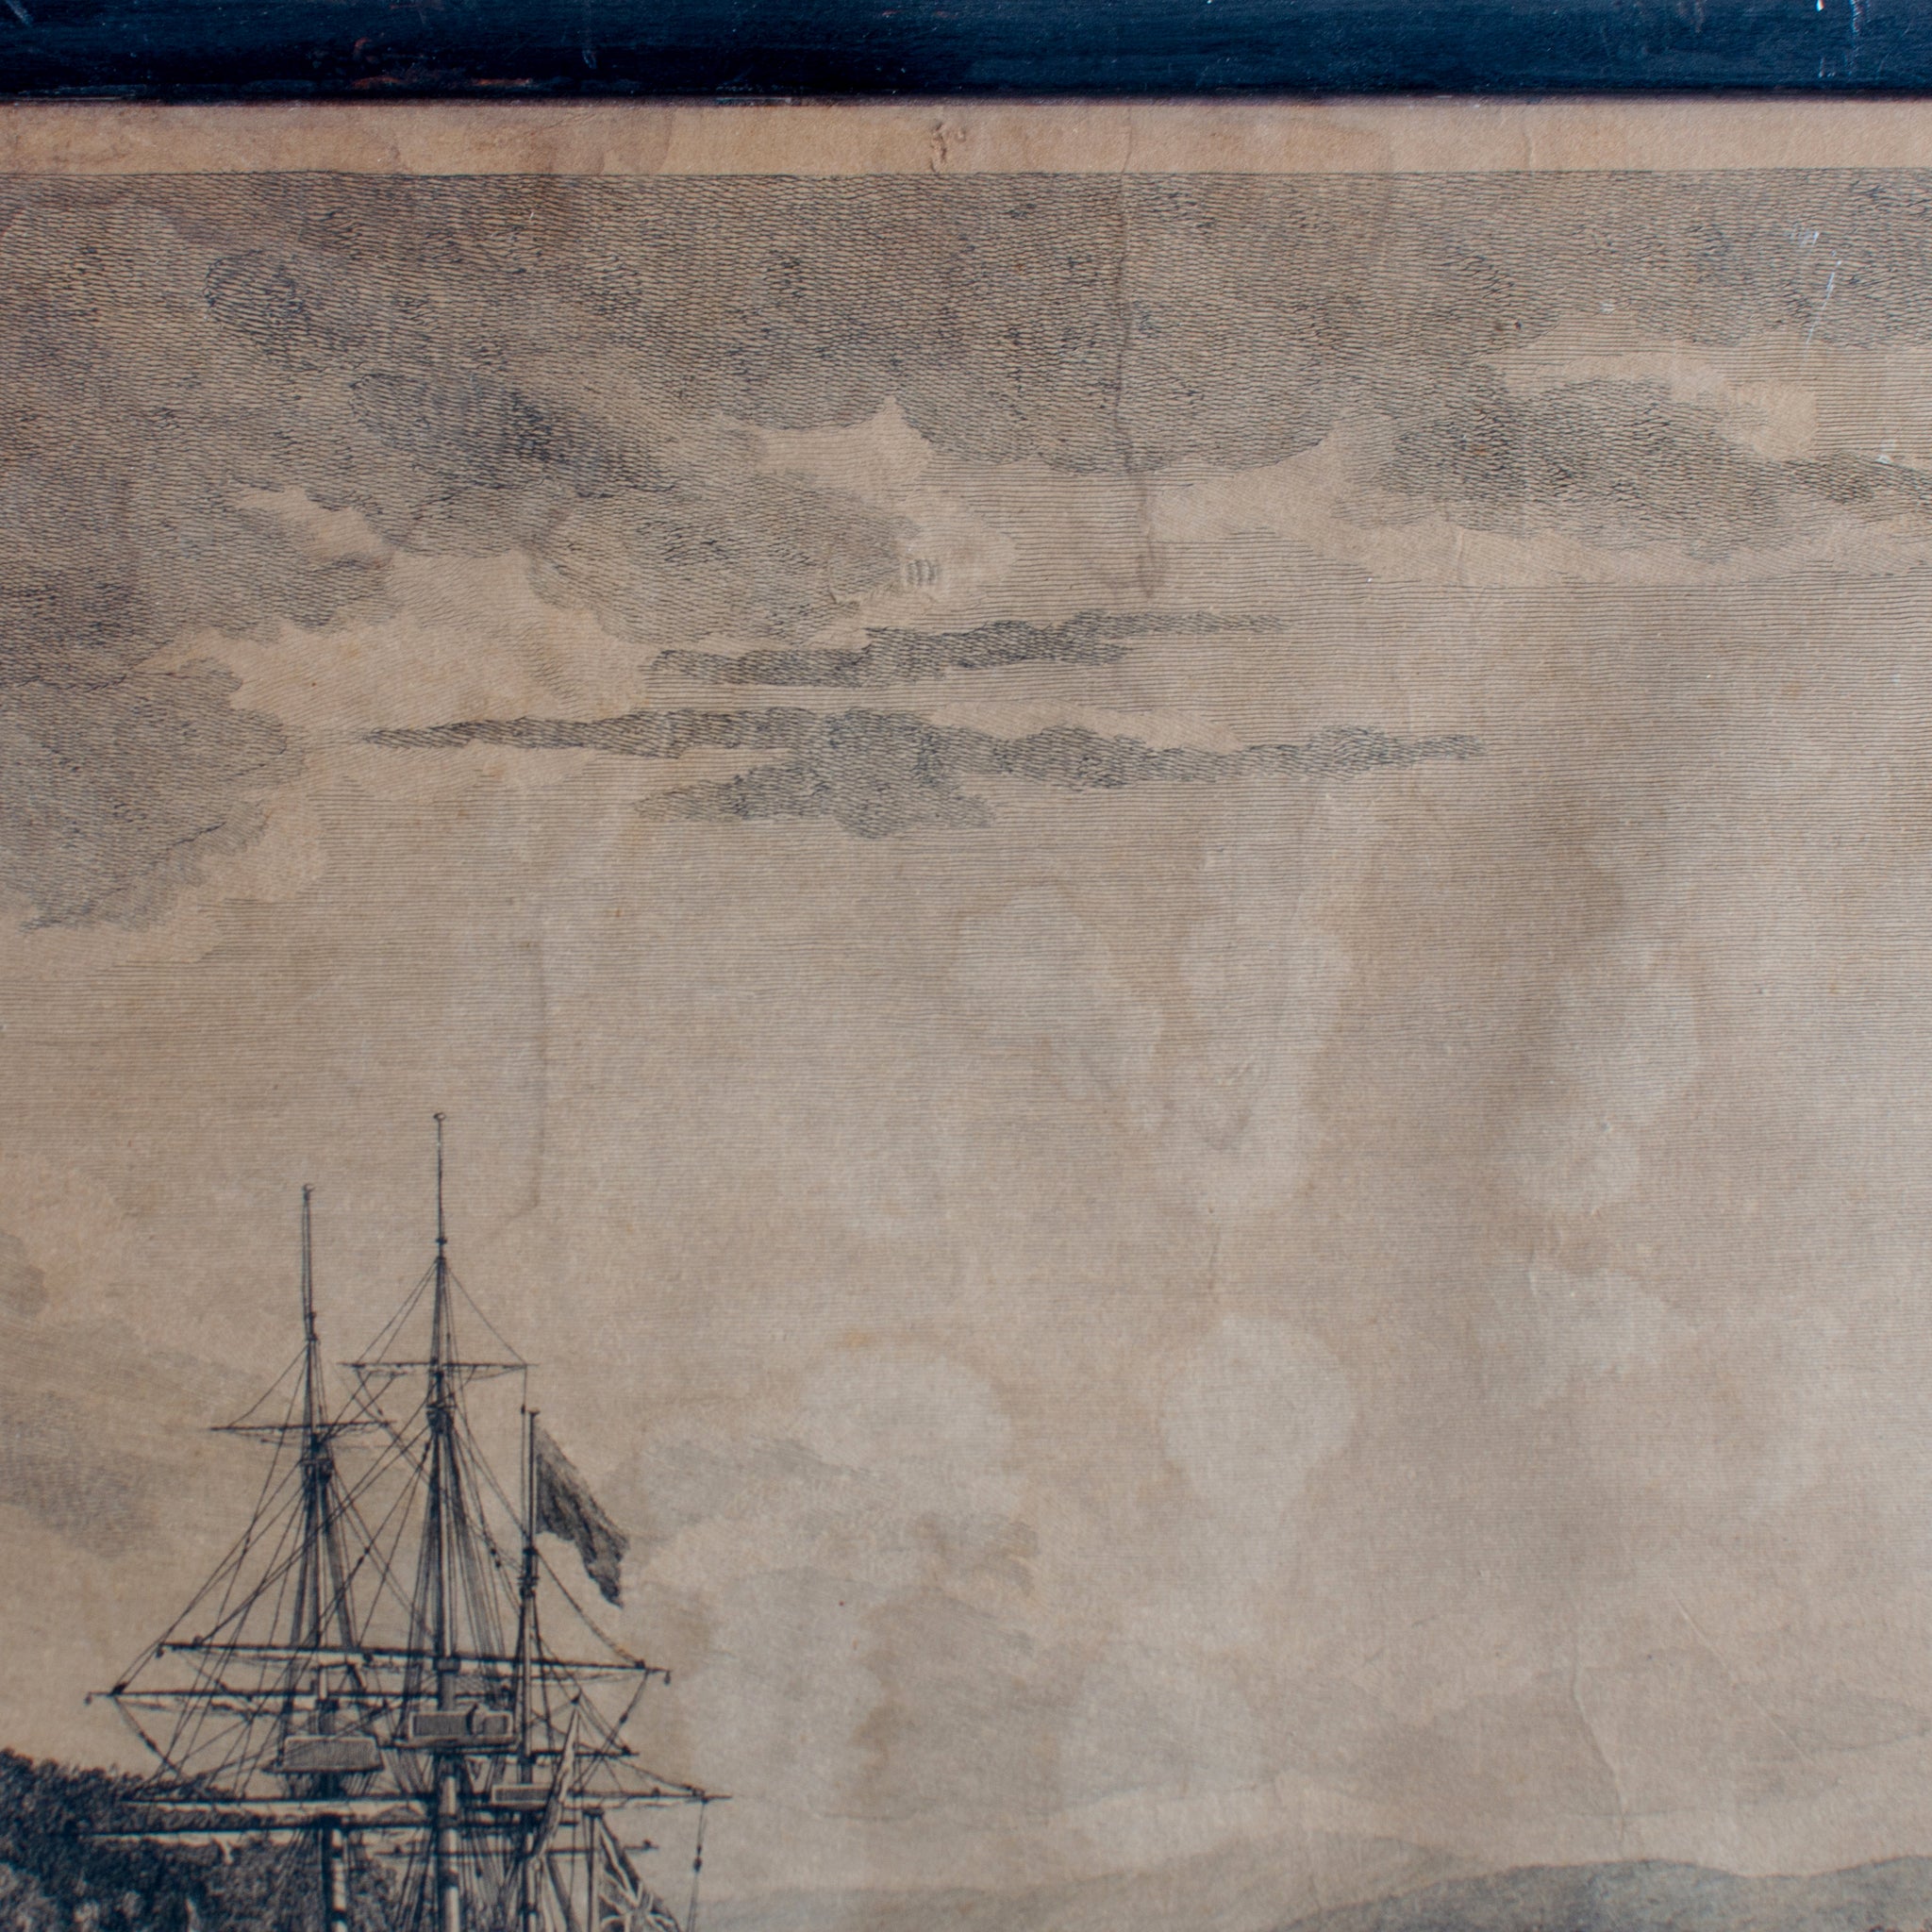 A View of Cape Rouge, Quebec, Canada, Mazell after Capt. Hervey Smyth, c.1760s